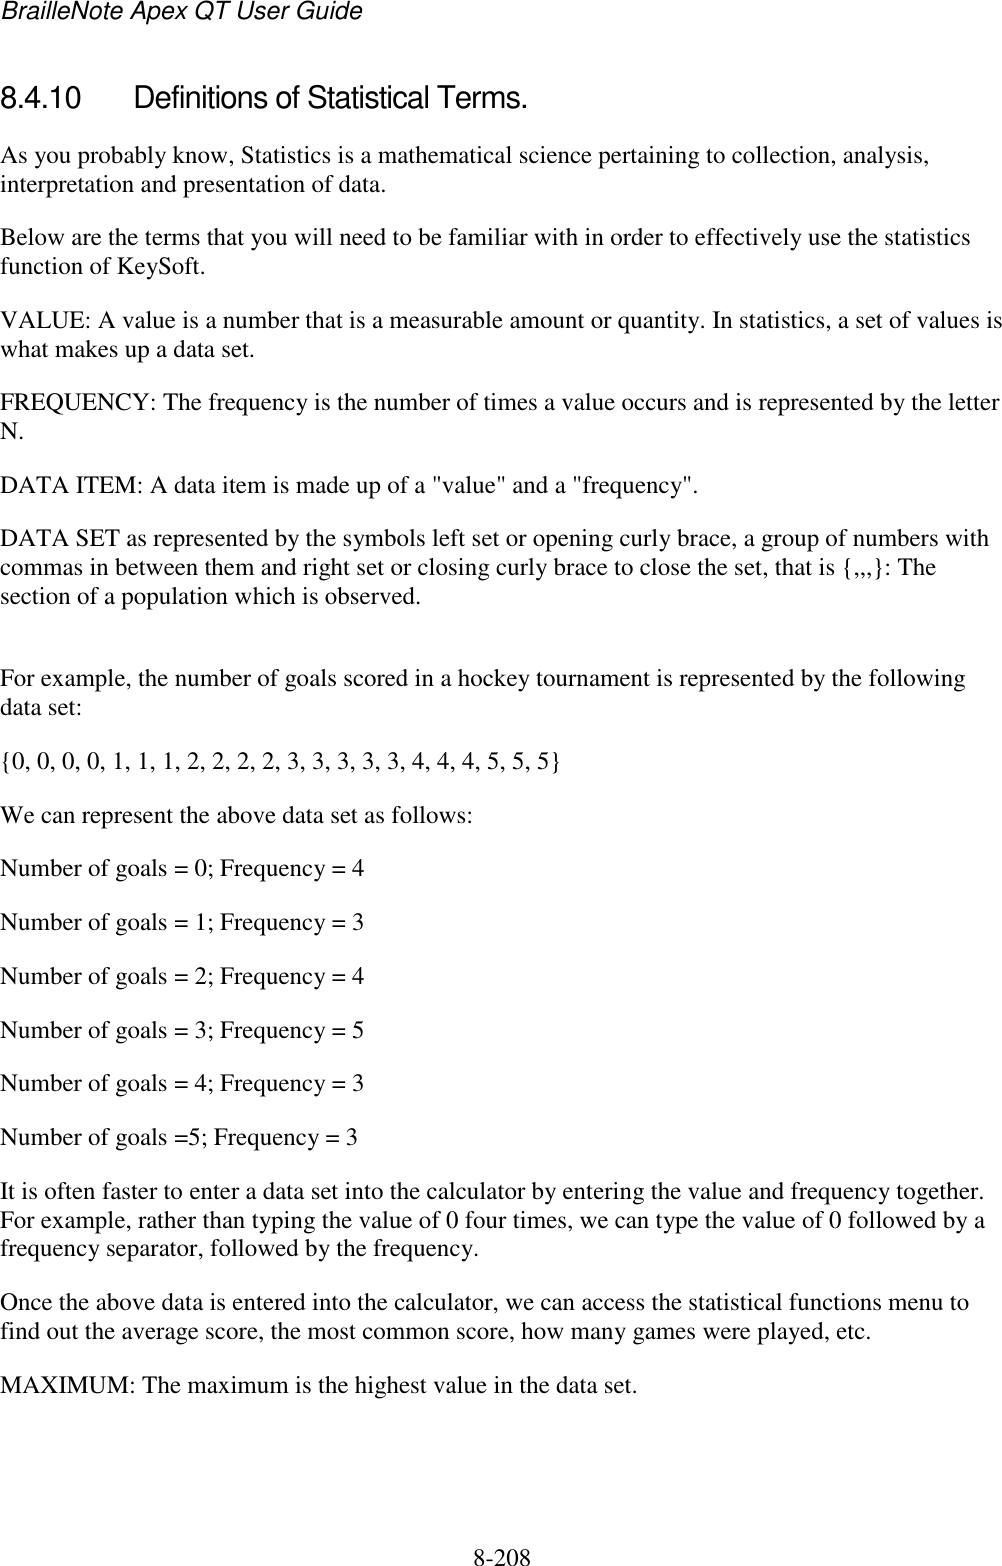 BrailleNote Apex QT User Guide  8-208   8.4.10  Definitions of Statistical Terms. As you probably know, Statistics is a mathematical science pertaining to collection, analysis, interpretation and presentation of data. Below are the terms that you will need to be familiar with in order to effectively use the statistics function of KeySoft. VALUE: A value is a number that is a measurable amount or quantity. In statistics, a set of values is what makes up a data set. FREQUENCY: The frequency is the number of times a value occurs and is represented by the letter N.  DATA ITEM: A data item is made up of a &quot;value&quot; and a &quot;frequency&quot;. DATA SET as represented by the symbols left set or opening curly brace, a group of numbers with commas in between them and right set or closing curly brace to close the set, that is {,,,}: The section of a population which is observed.  For example, the number of goals scored in a hockey tournament is represented by the following data set: {0, 0, 0, 0, 1, 1, 1, 2, 2, 2, 2, 3, 3, 3, 3, 3, 4, 4, 4, 5, 5, 5} We can represent the above data set as follows: Number of goals = 0; Frequency = 4         Number of goals = 1; Frequency = 3 Number of goals = 2; Frequency = 4 Number of goals = 3; Frequency = 5 Number of goals = 4; Frequency = 3 Number of goals =5; Frequency = 3 It is often faster to enter a data set into the calculator by entering the value and frequency together. For example, rather than typing the value of 0 four times, we can type the value of 0 followed by a frequency separator, followed by the frequency. Once the above data is entered into the calculator, we can access the statistical functions menu to find out the average score, the most common score, how many games were played, etc. MAXIMUM: The maximum is the highest value in the data set. 